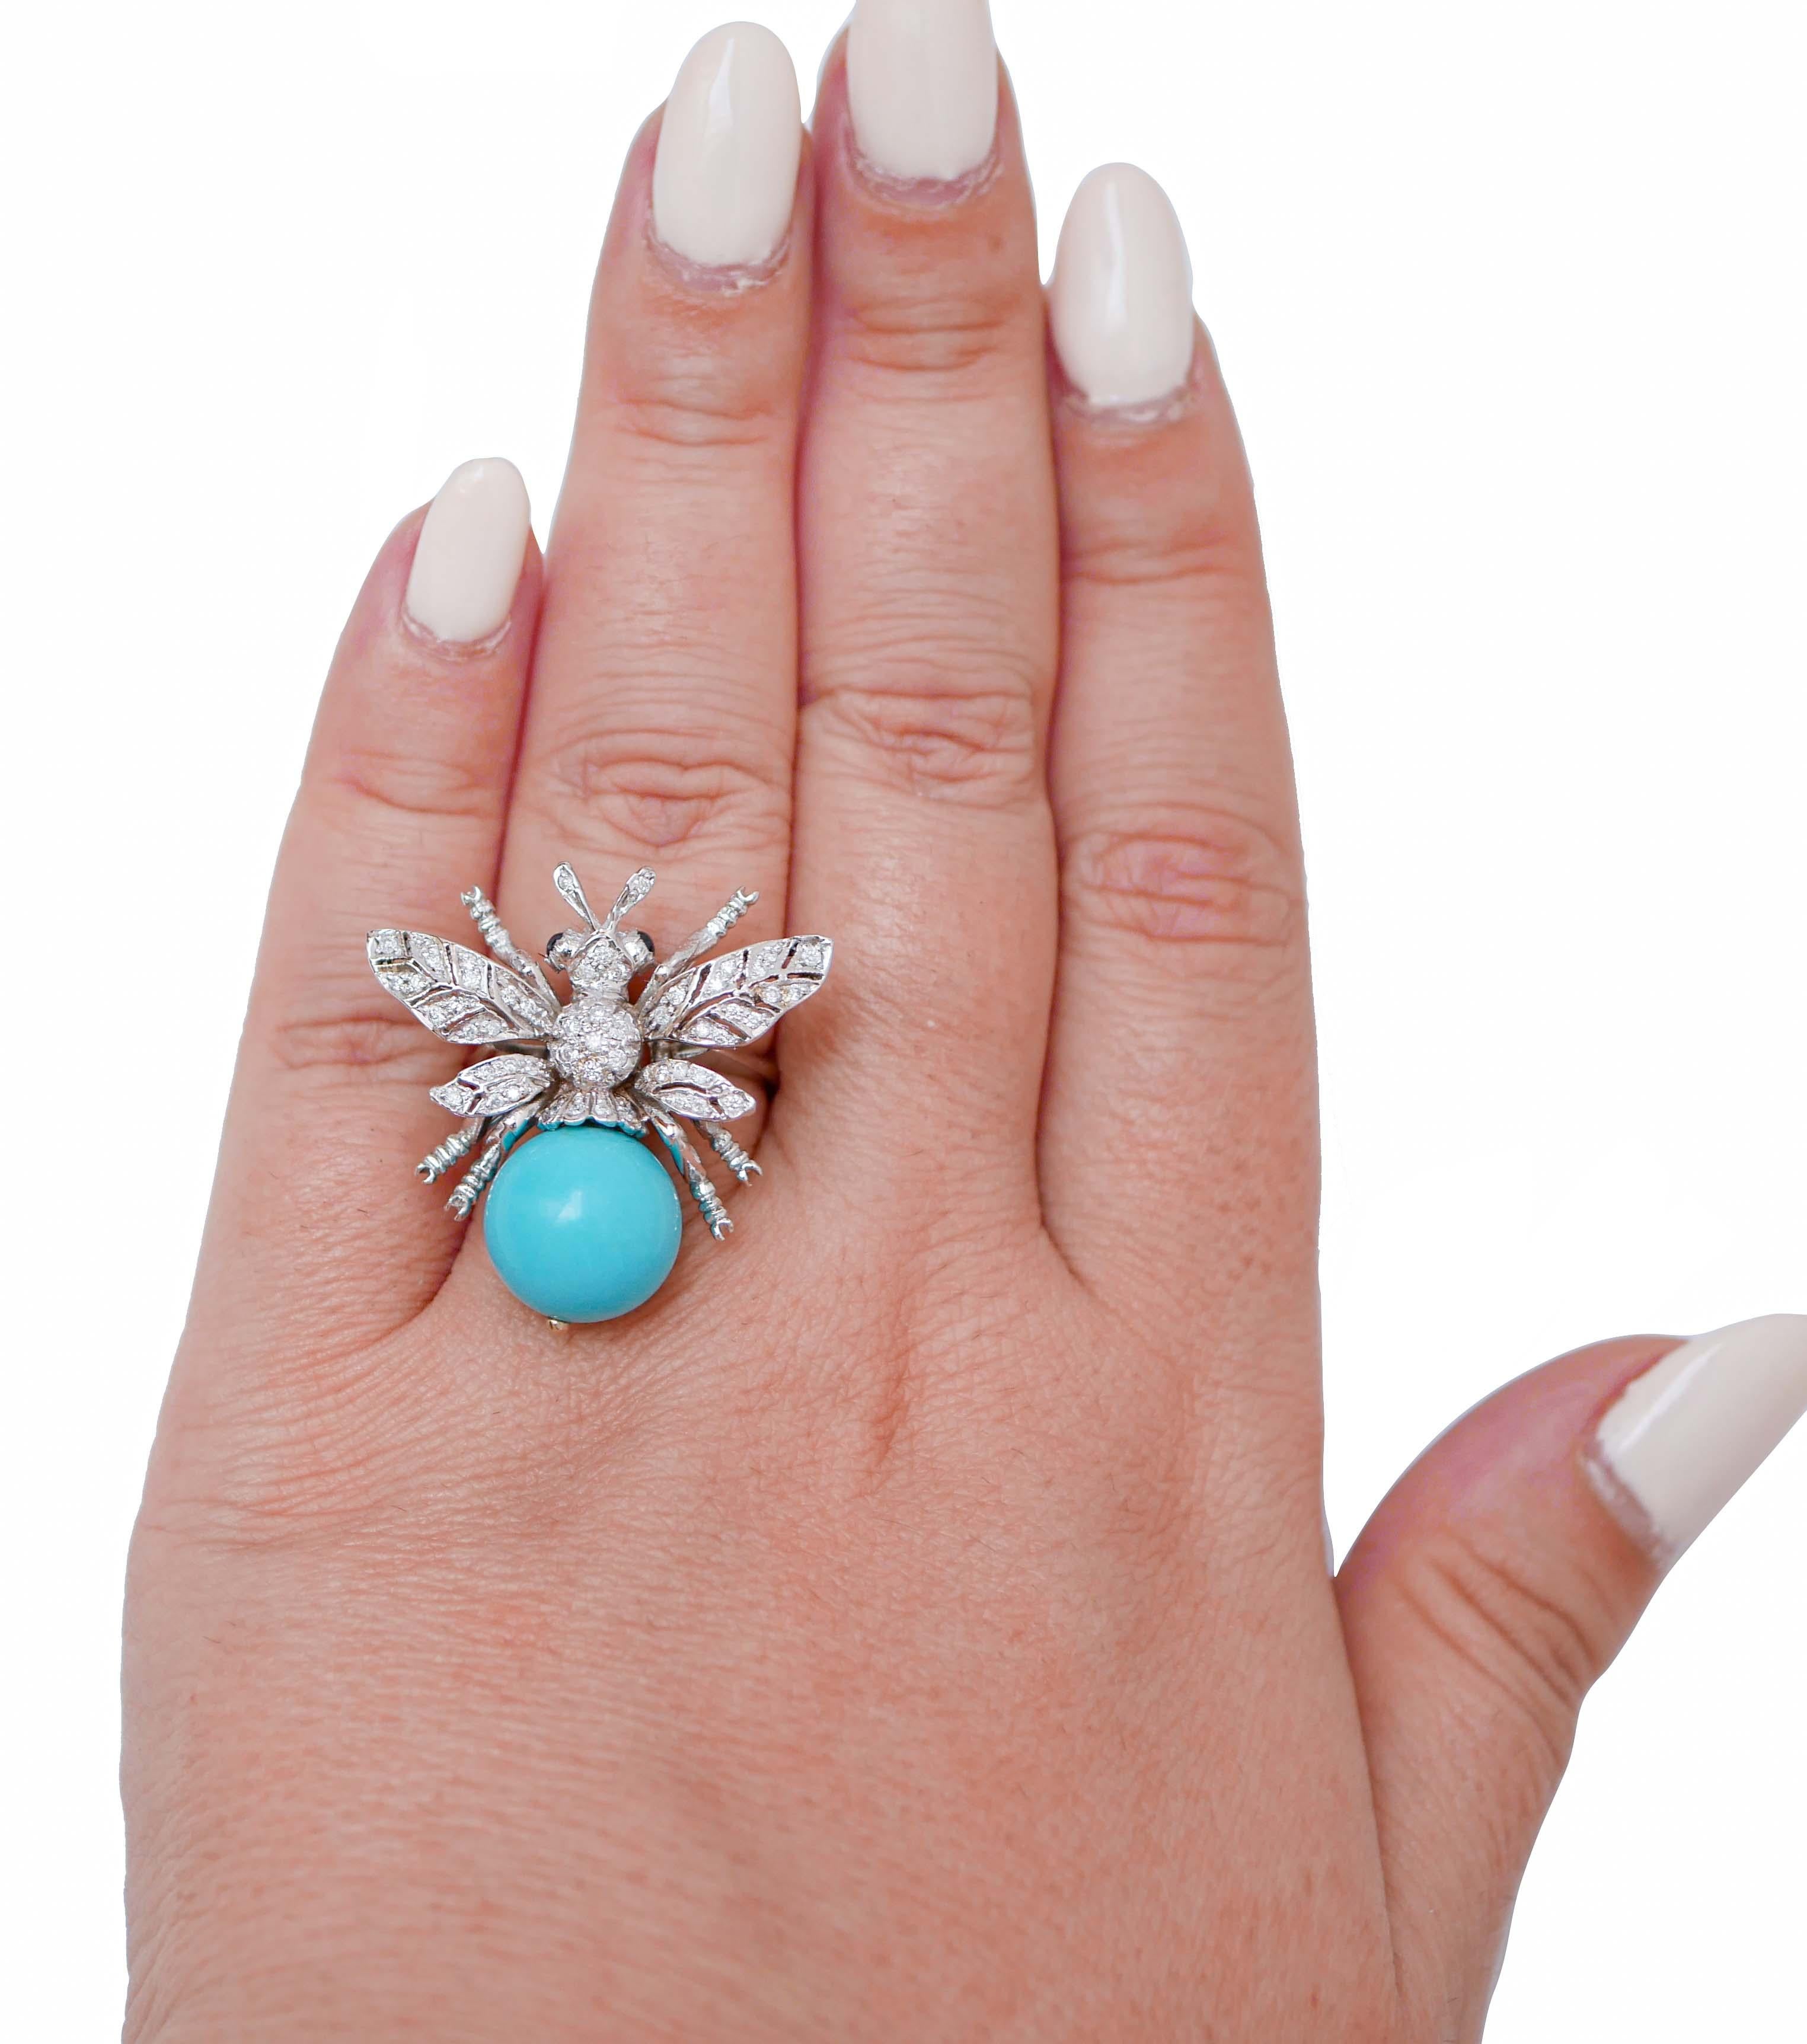 Mixed Cut Magnesite, Sapphires, Diamonds, 14 Karat White Gold Bee Ring. For Sale